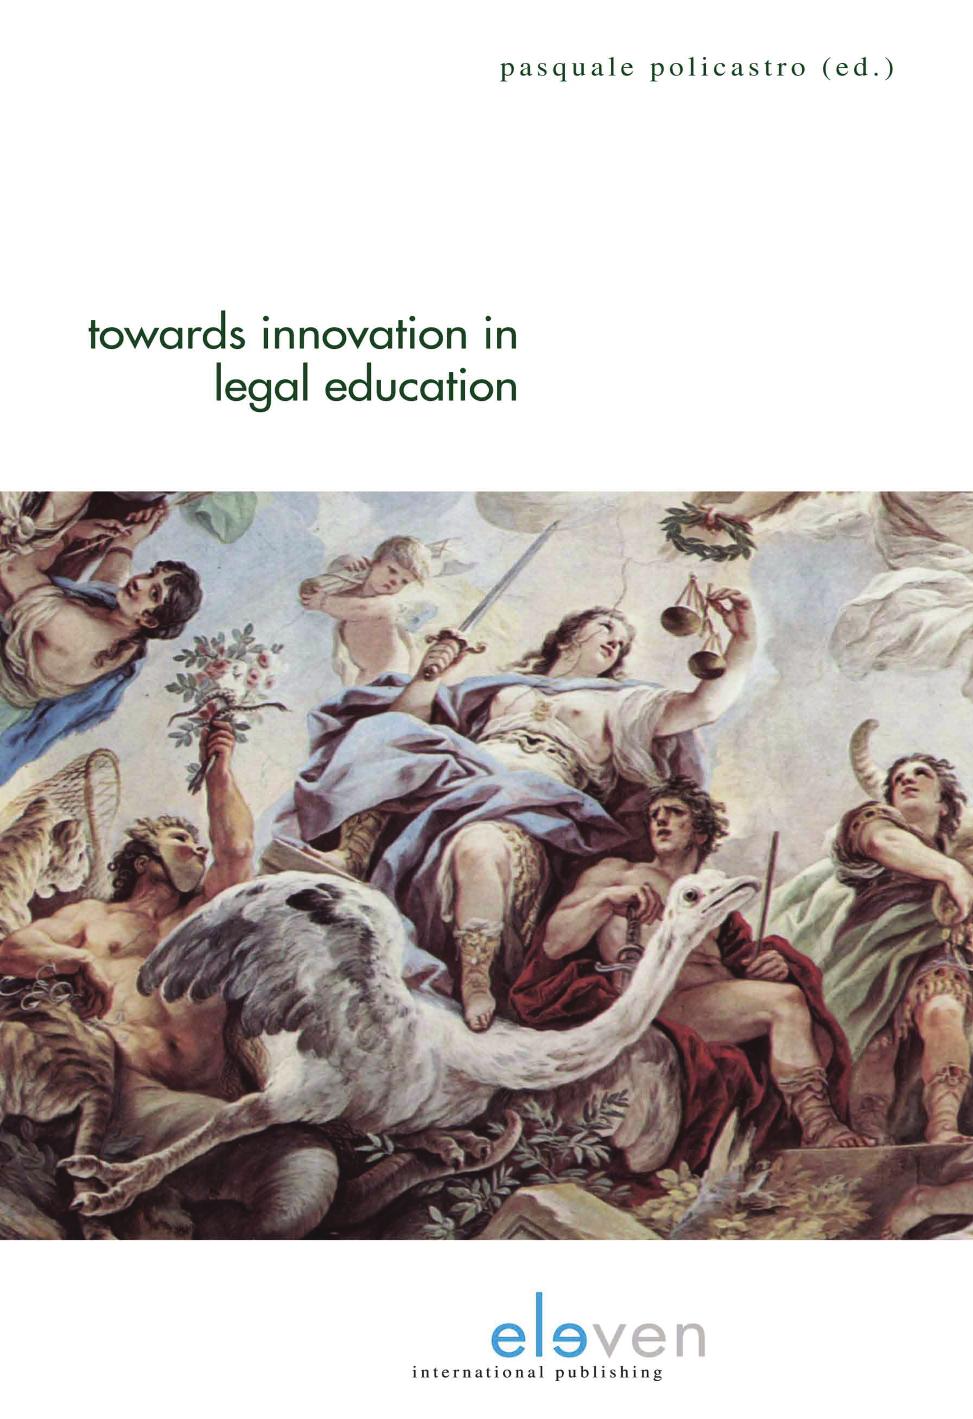 Towards Innovation in Legal Education by Pasquale Policastro